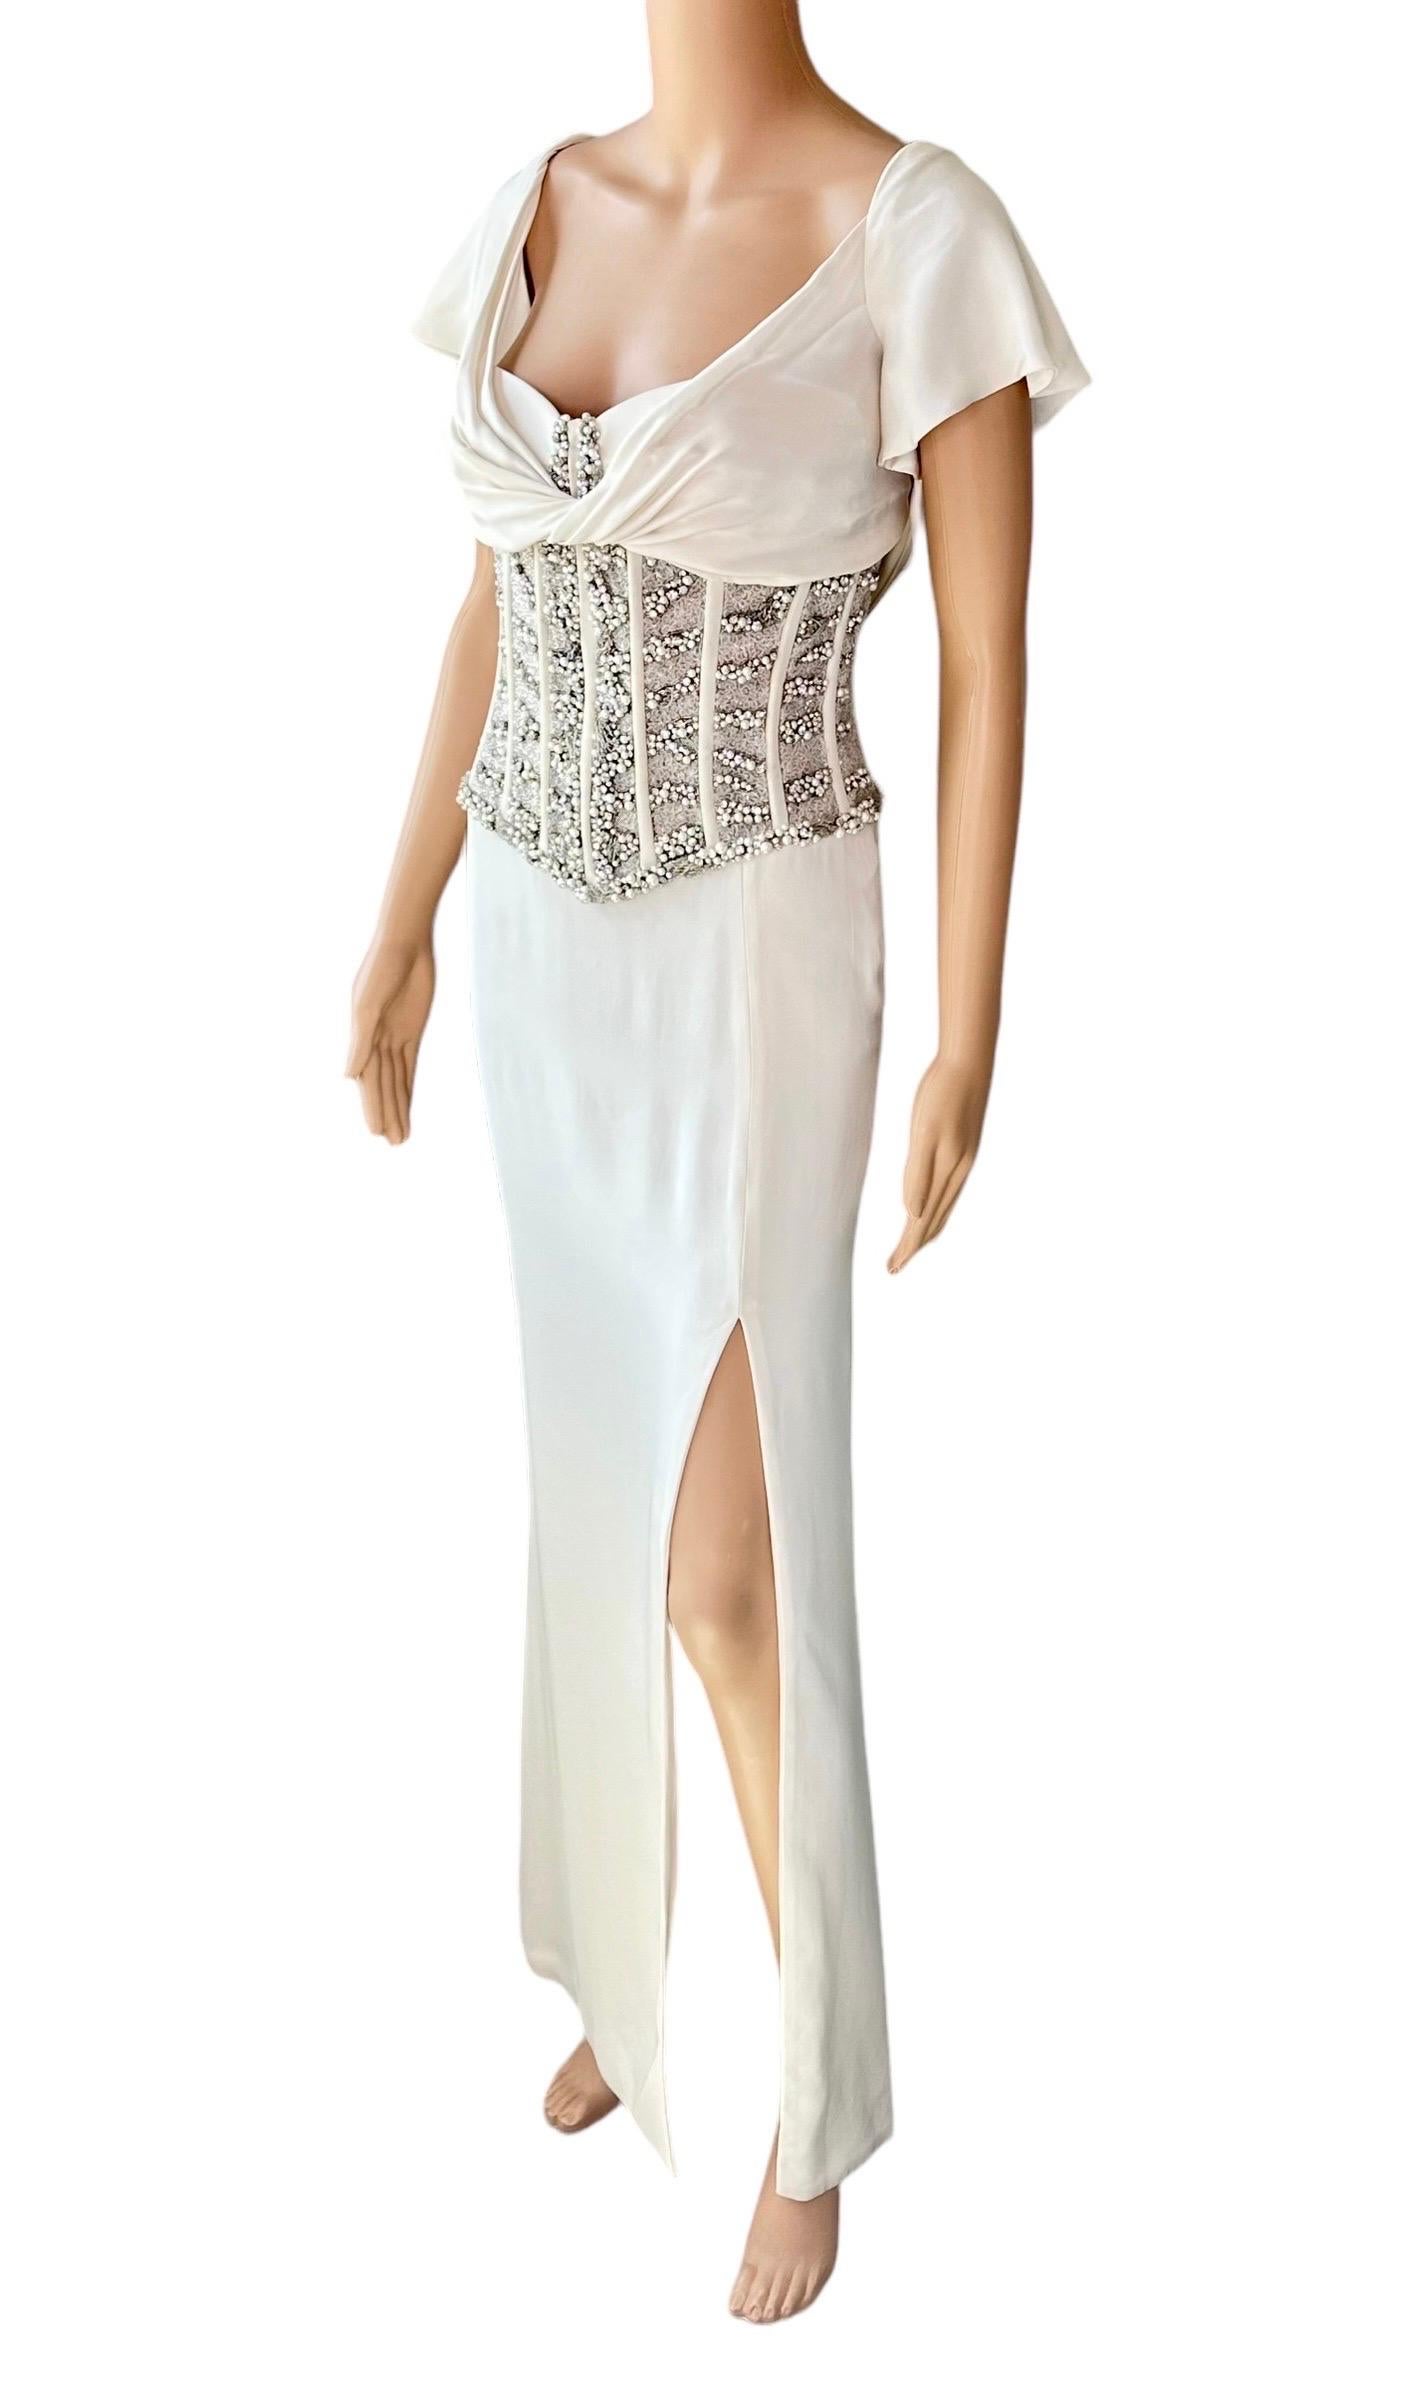 Roberto Cavalli Embellished Corset Empire Silhouette Evening Dress Gown For Sale 1